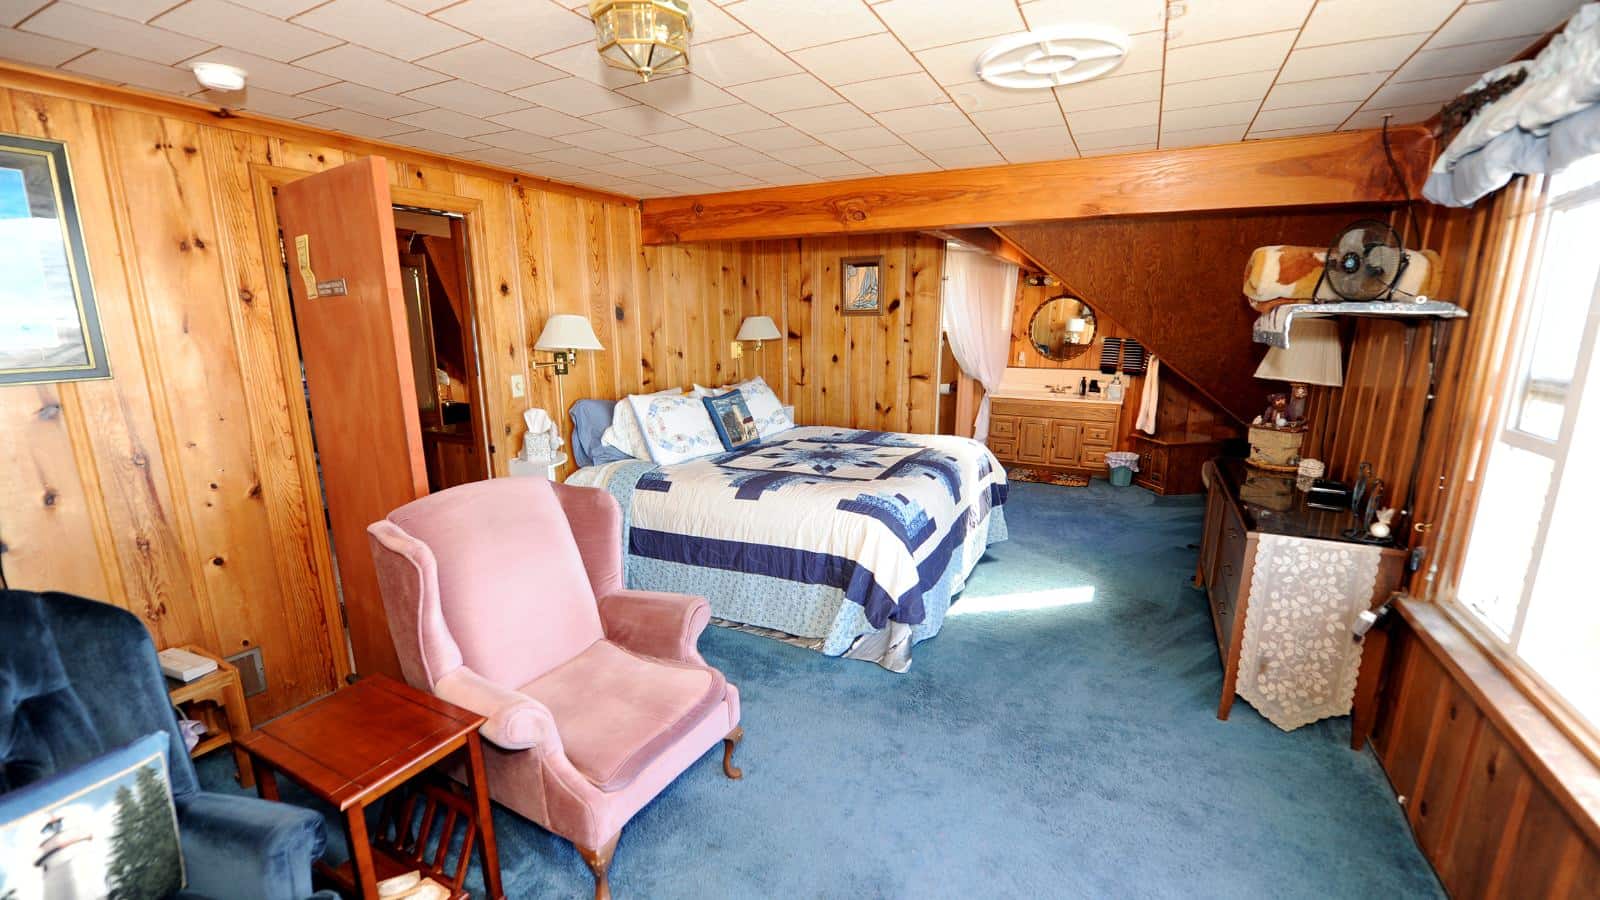 Bedroom with wood paneled walls, carpeting, multicolored bedding, antique pink upholstered armchair, and wooden vanity with sink